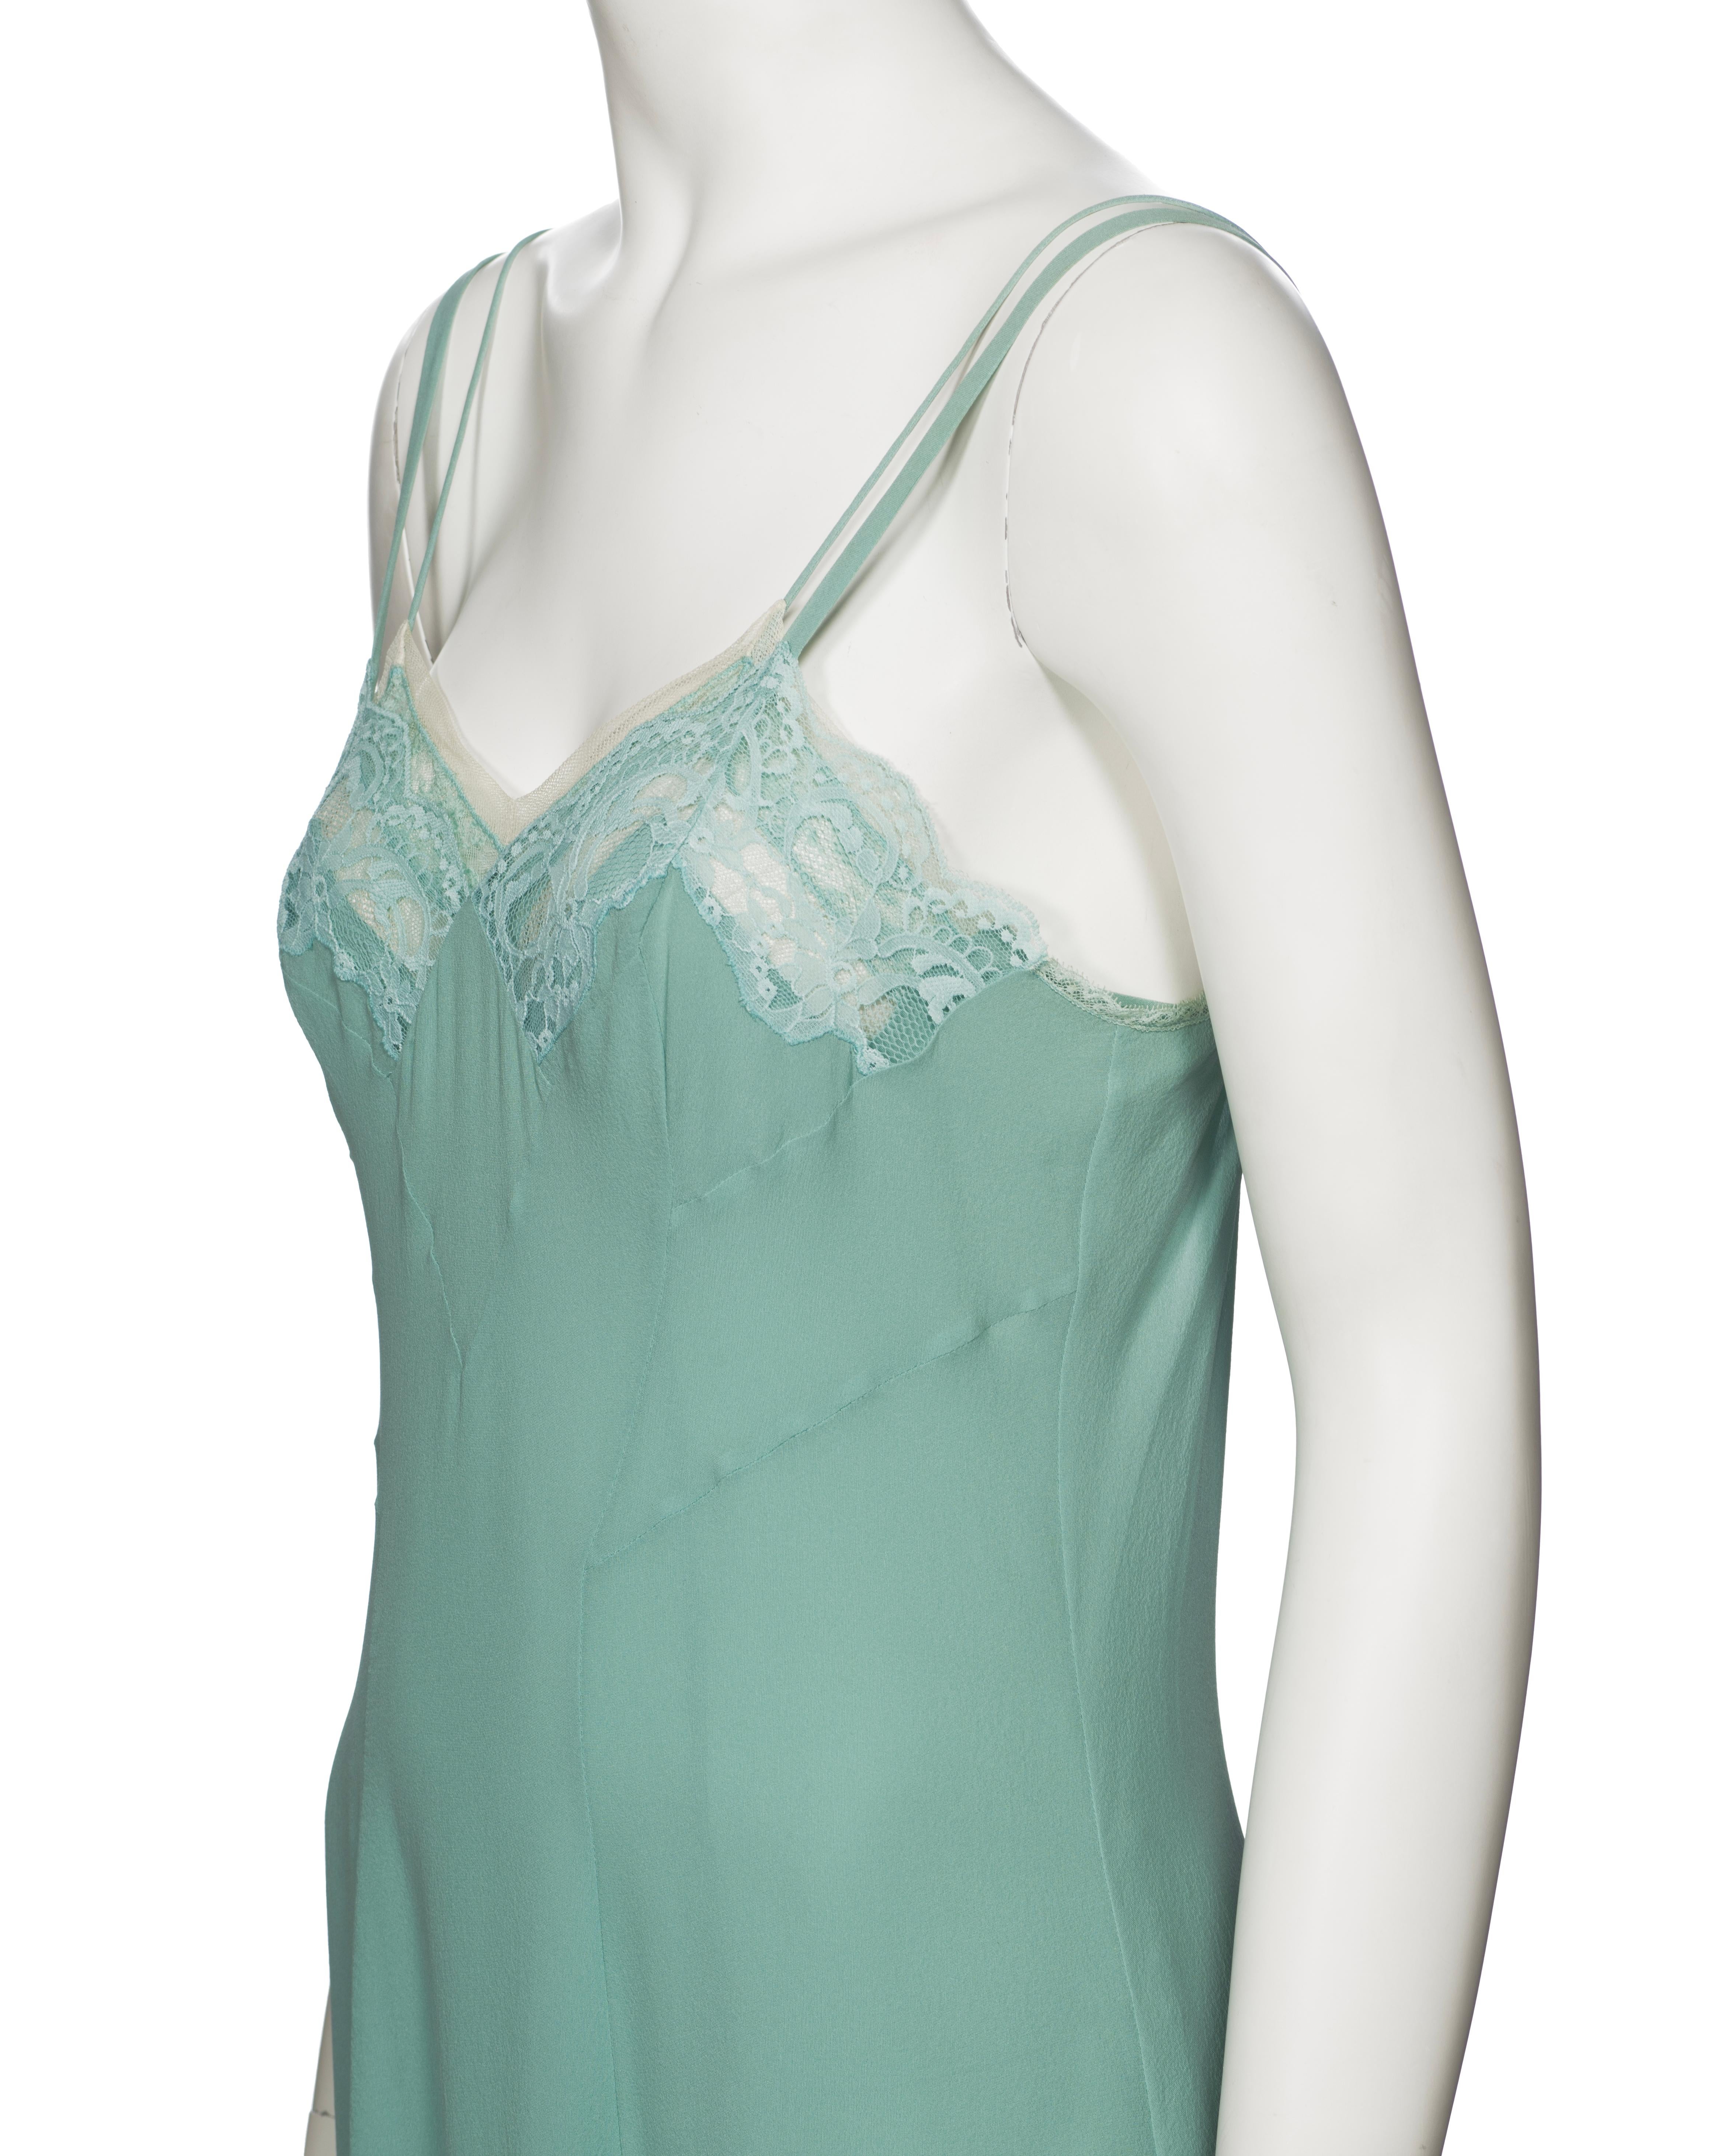 Christian Dior by John Galliano Turquoise Silk Double Layered Dress, ss 2005 6